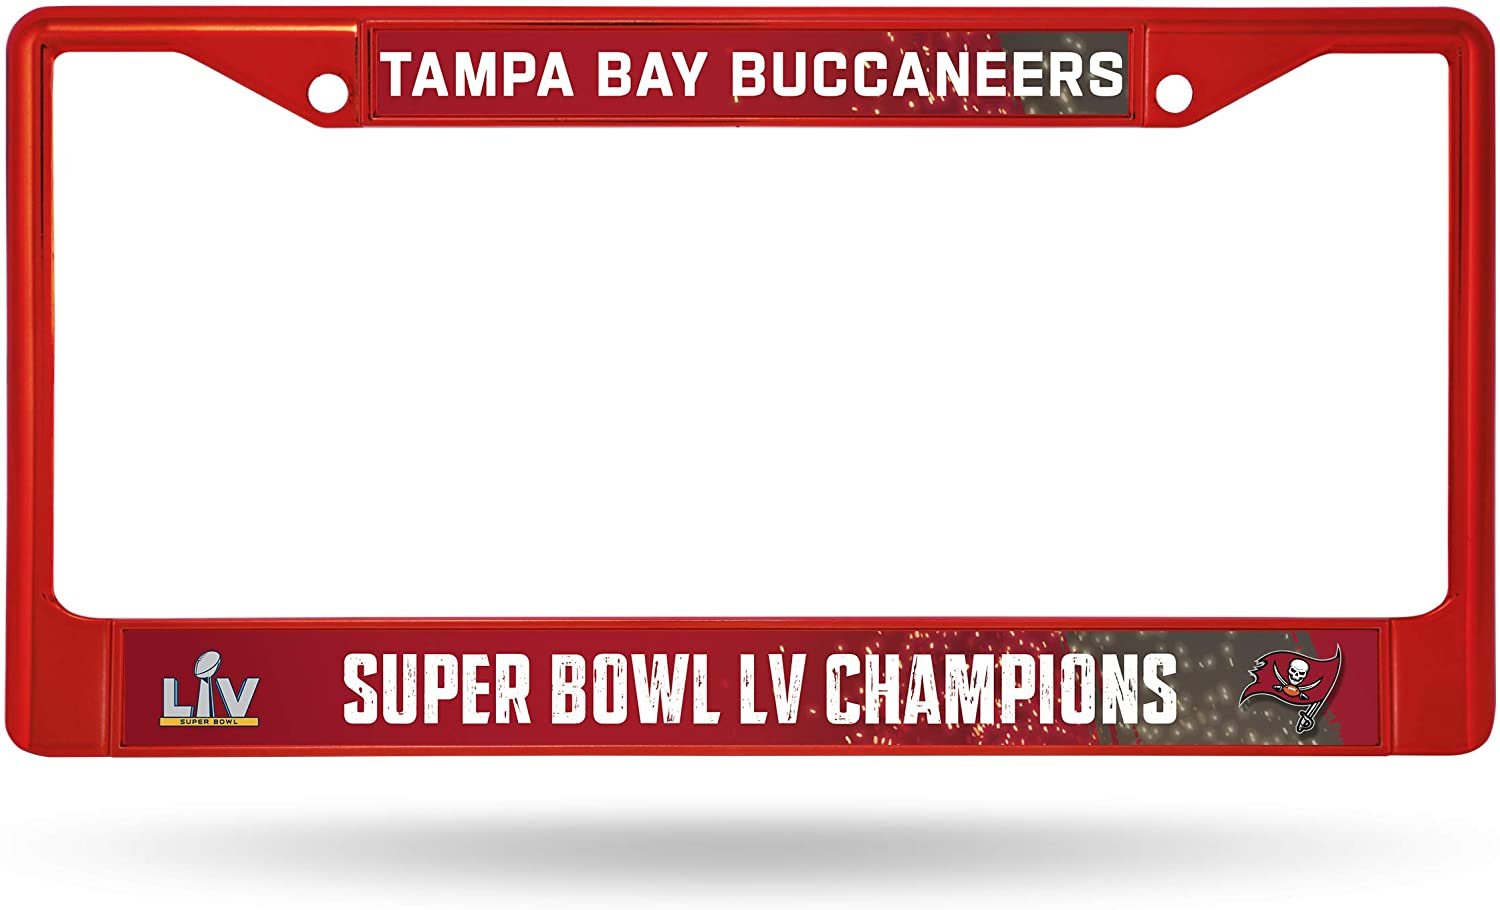 Tampa Bay Buccaneers Super Bowl LV Champions Red Metal License License Plate Frame Tag Cover, 12x6 Inch